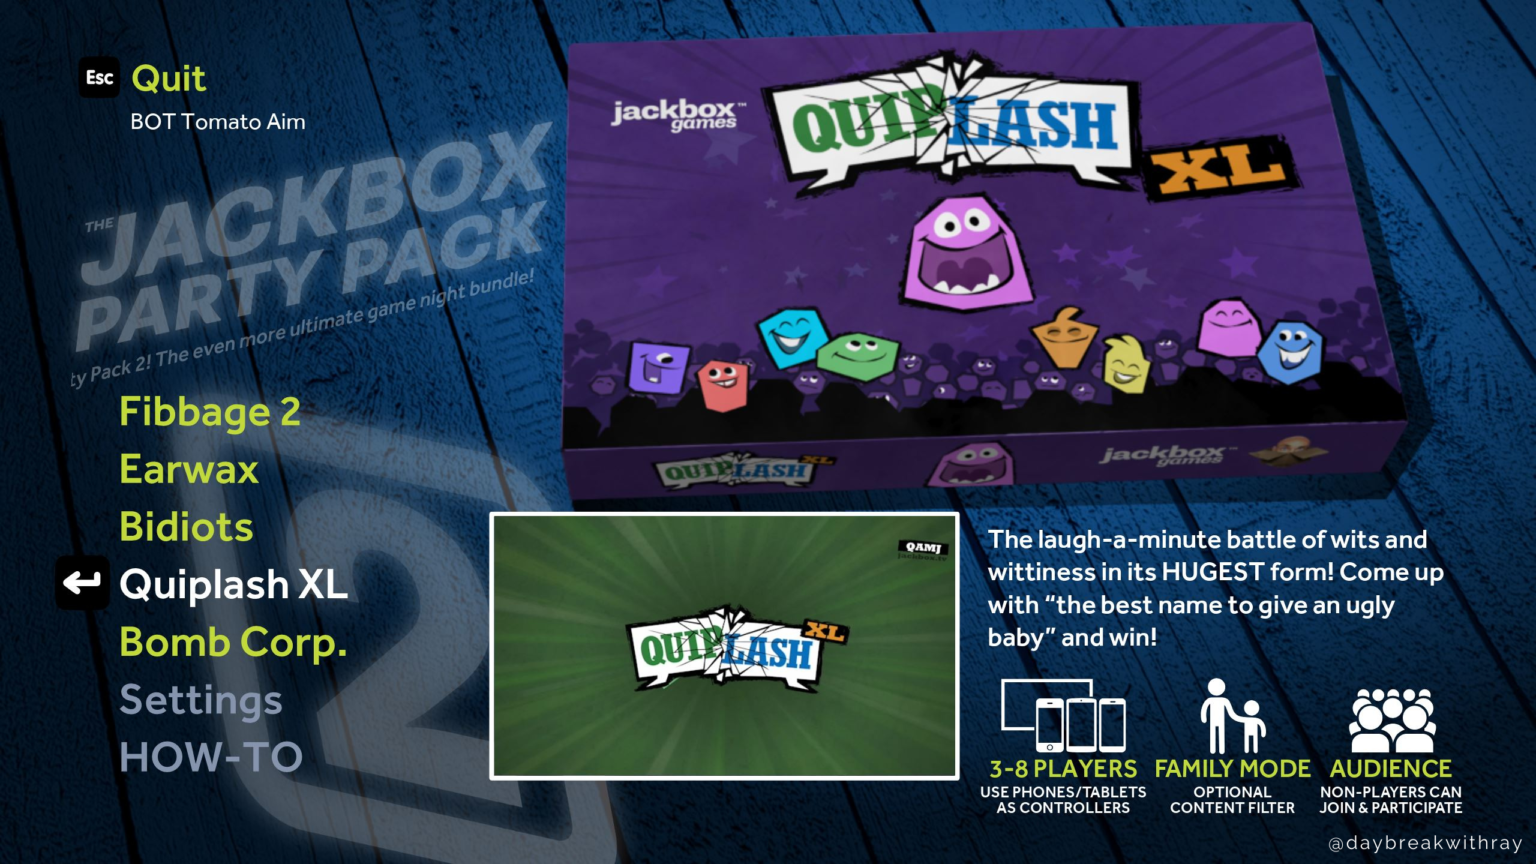 does the jackbox party pack 2 had online multiplayer